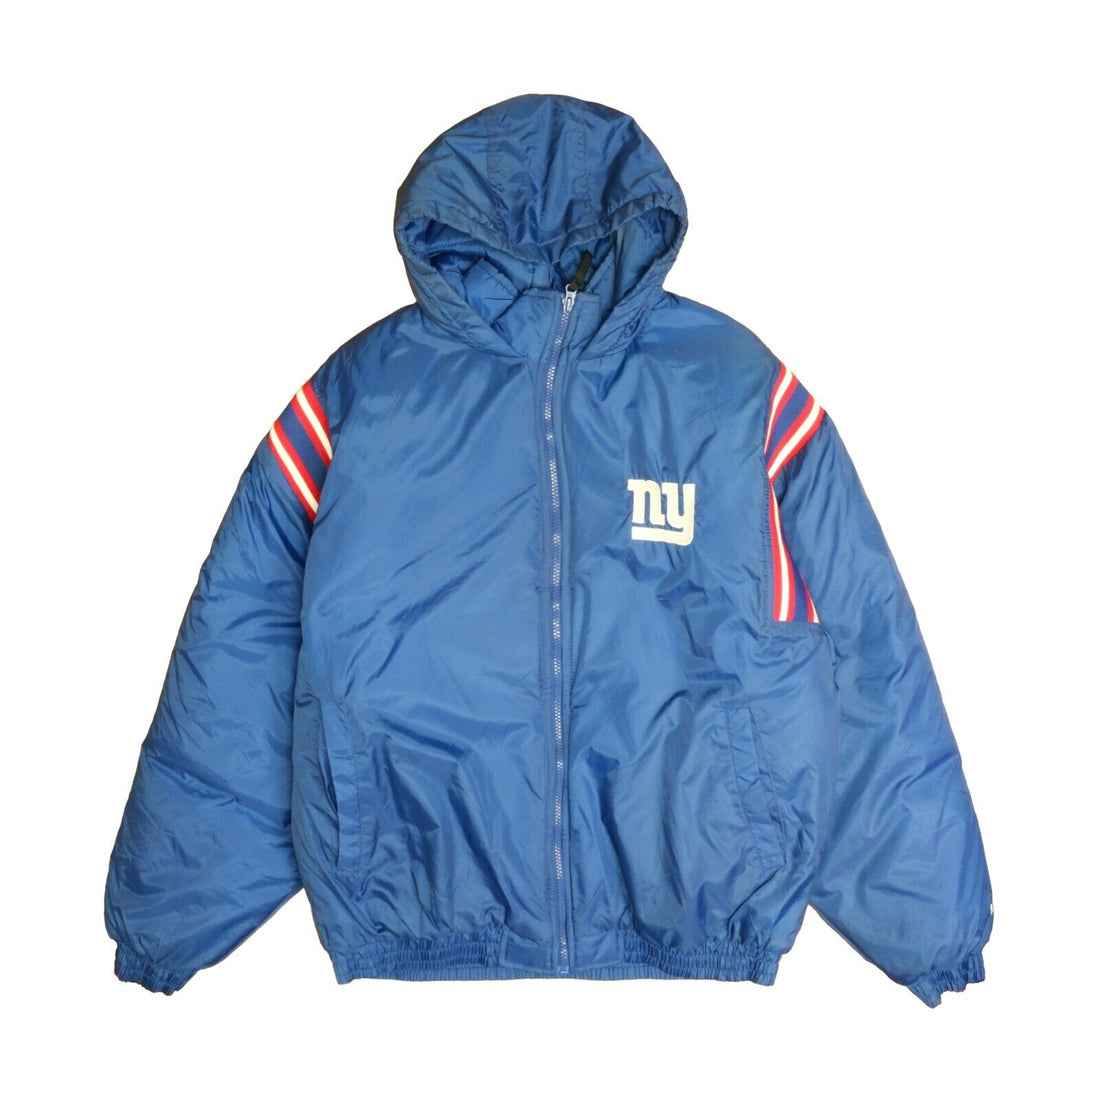 Vintage New York Giants Puma Puffer Jacket Size Large Insulated NFL